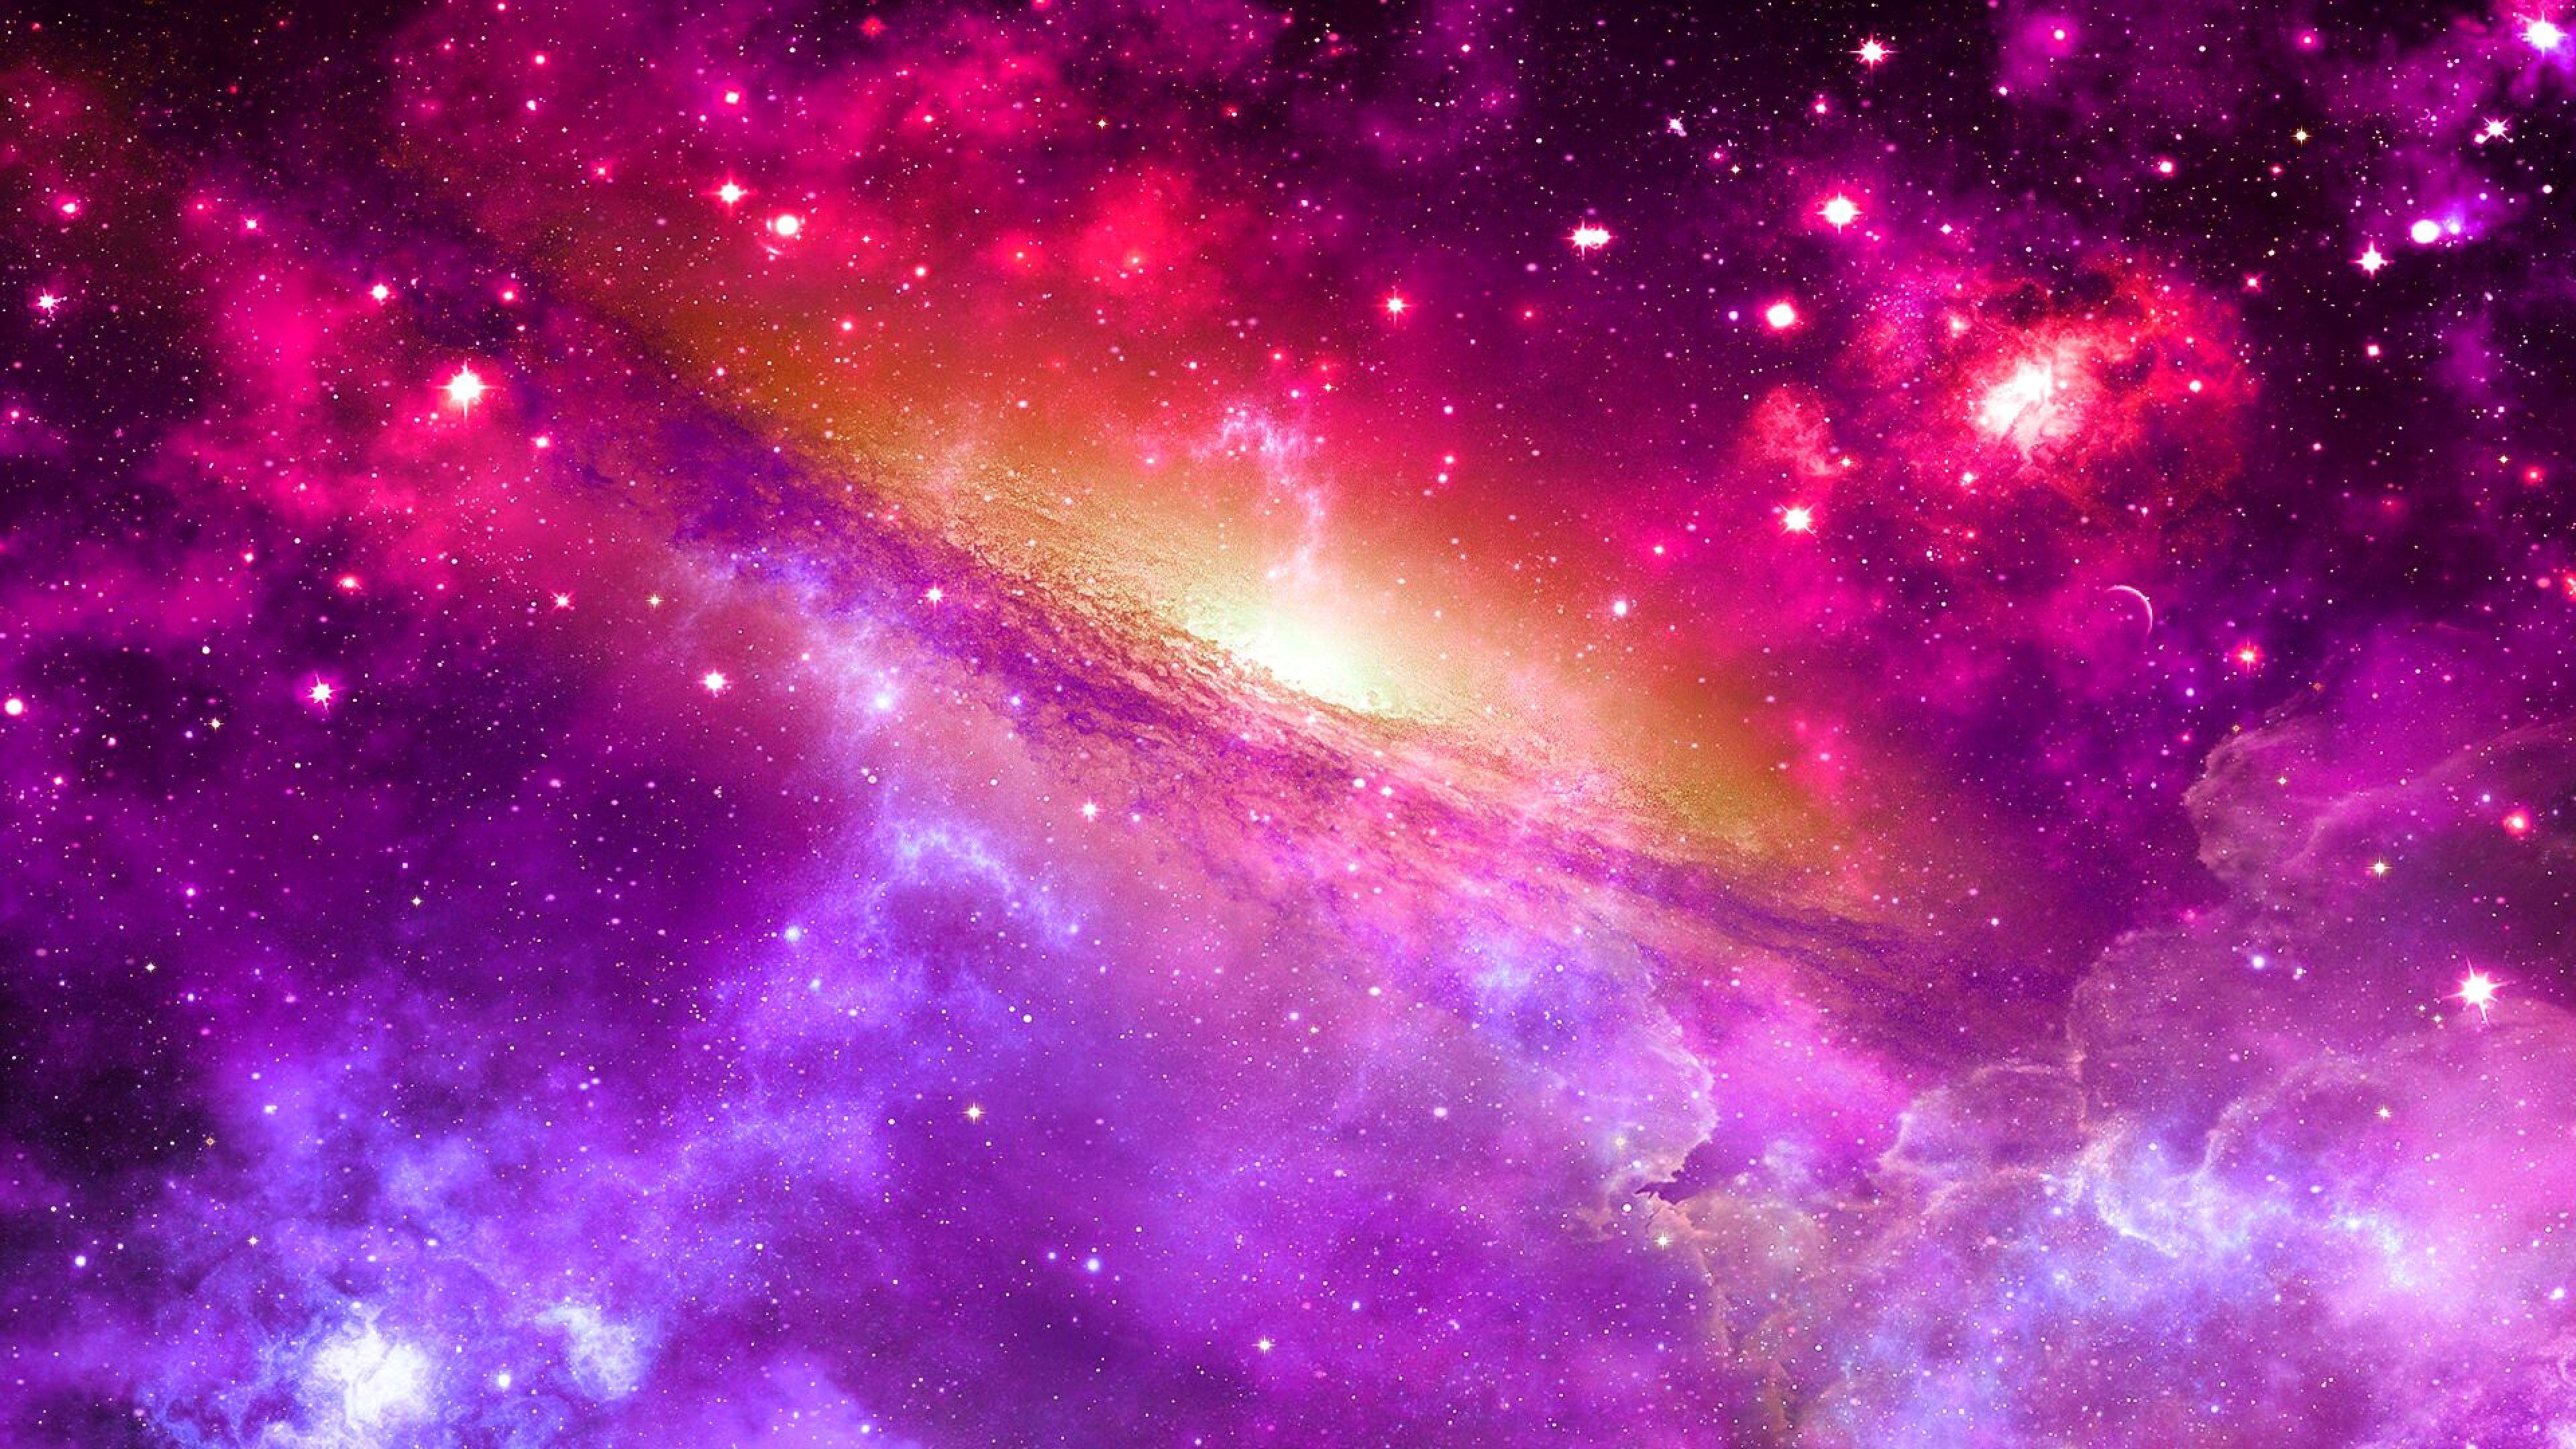 4K Universe Wallpapers - Top Free 4K Universe Backgrounds ...